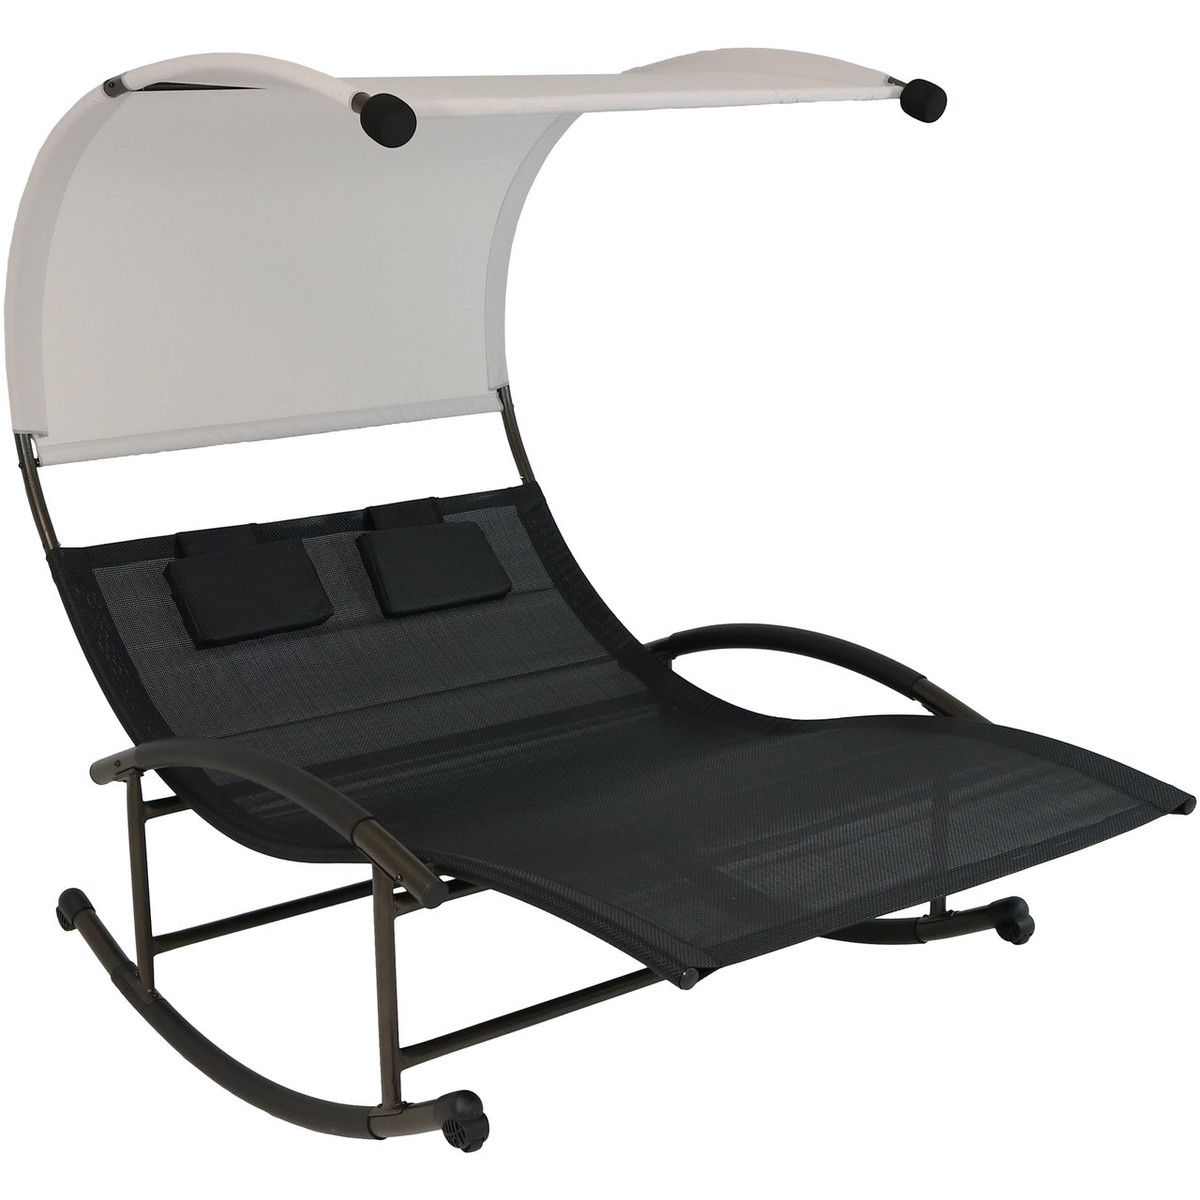 Sunnydaze Double Chaise Rocking Lounge Chair With Canopy And